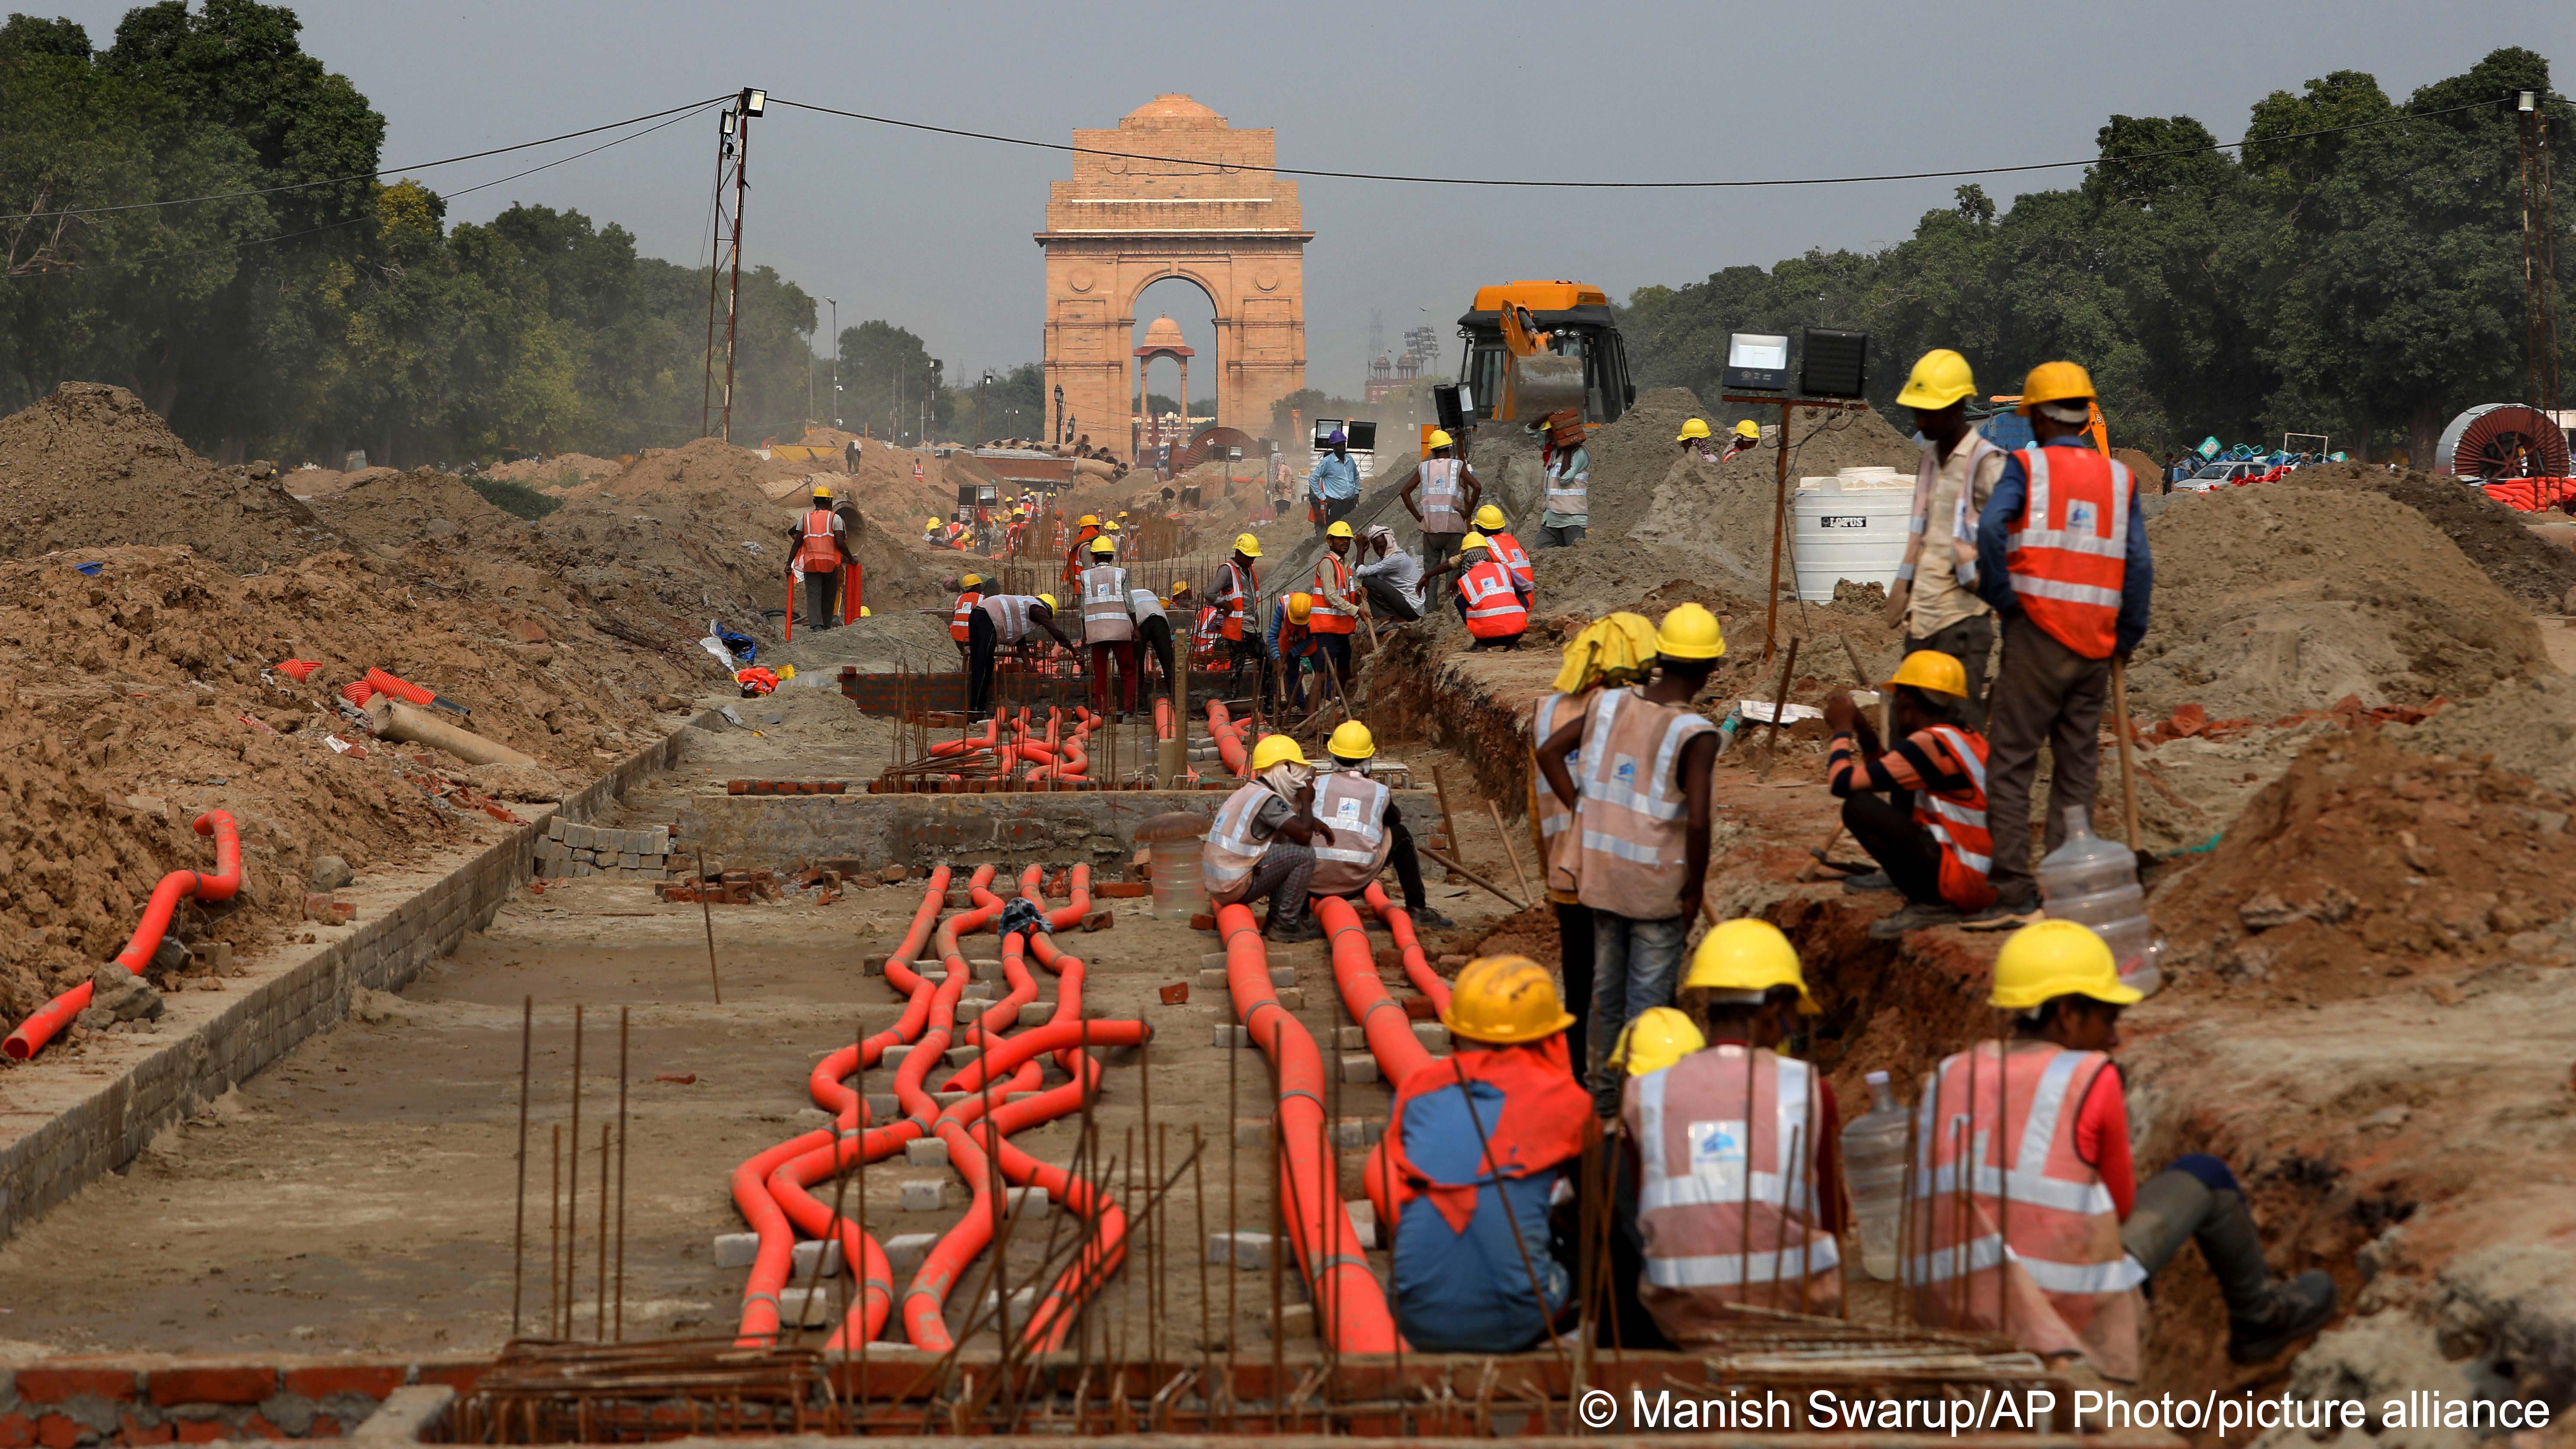 India Gate monument is seen behind as laborers work on the Central Vista project in New Delhi, India, 16 July 2021 (photo: AP Photo/Manish Swarup)